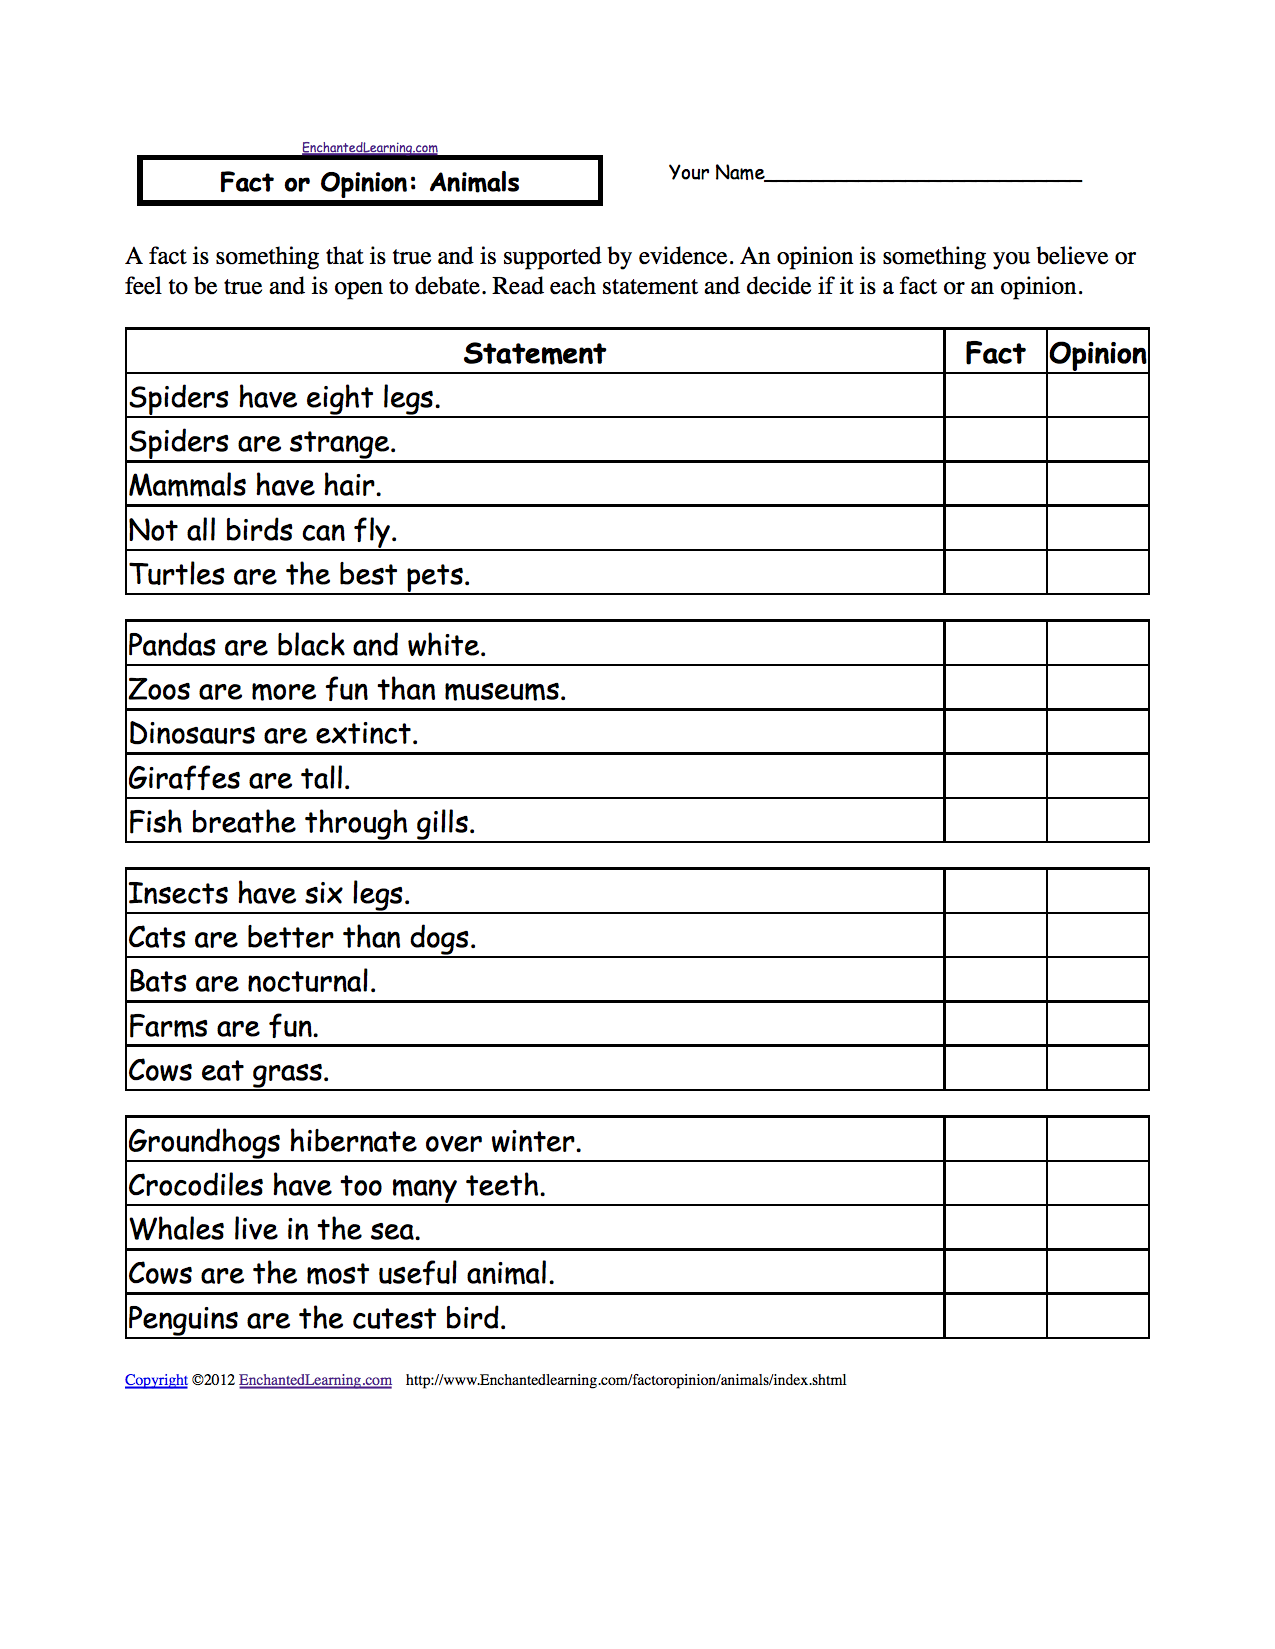 Fact or Opinion? Checkmark Worksheets to Print - EnchantedLearning.com In Fact Or Opinion Worksheet